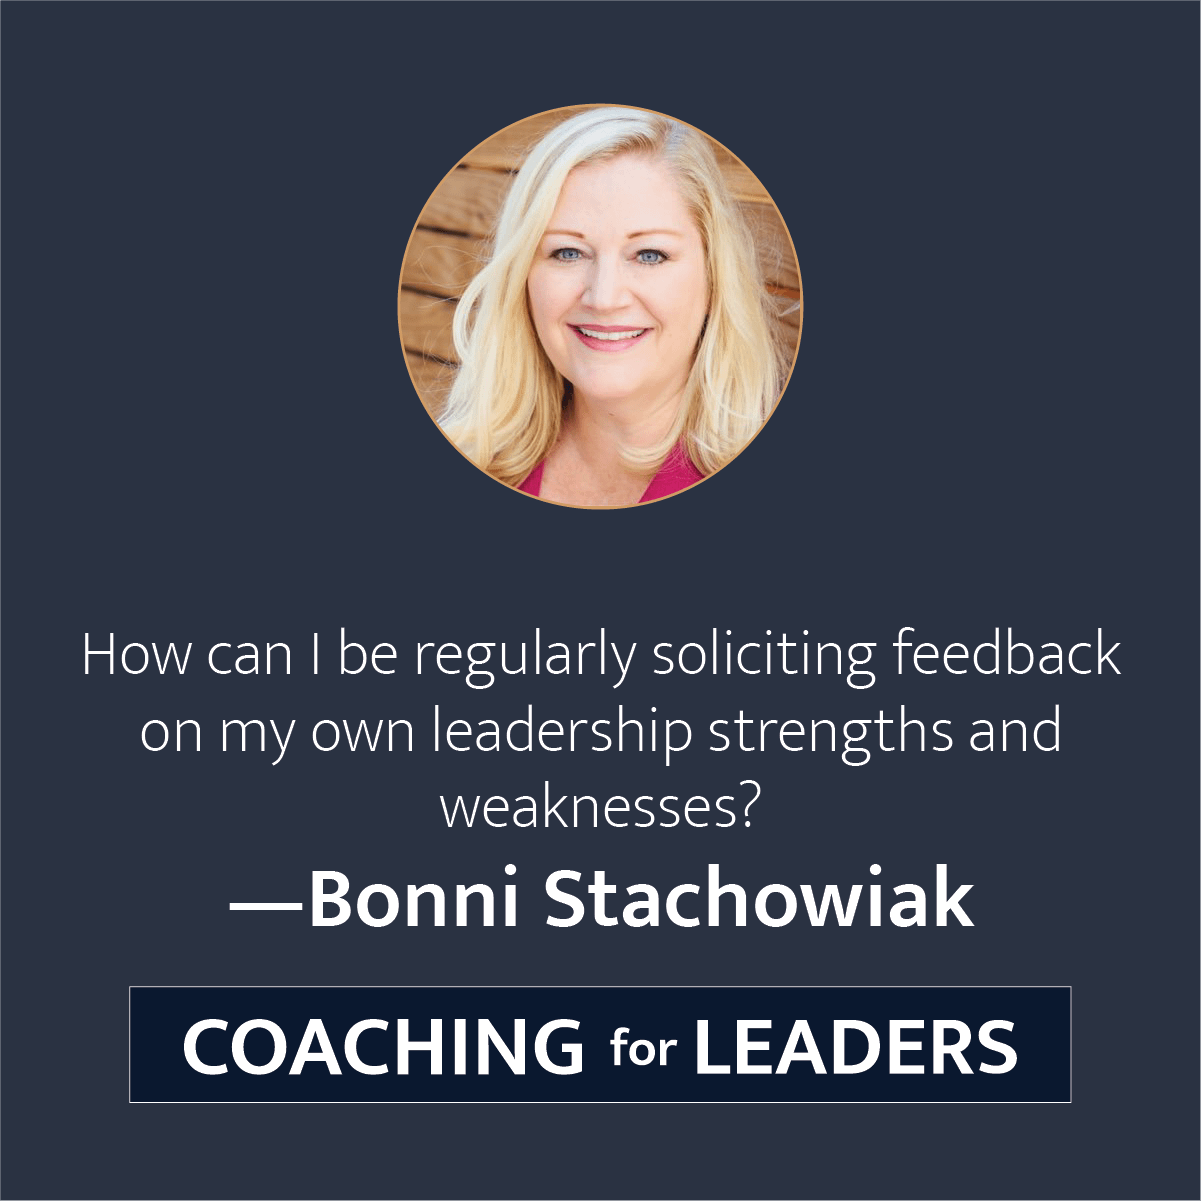 How can I be regularly soliciting feedback on my own leadership strengths and weaknesses?